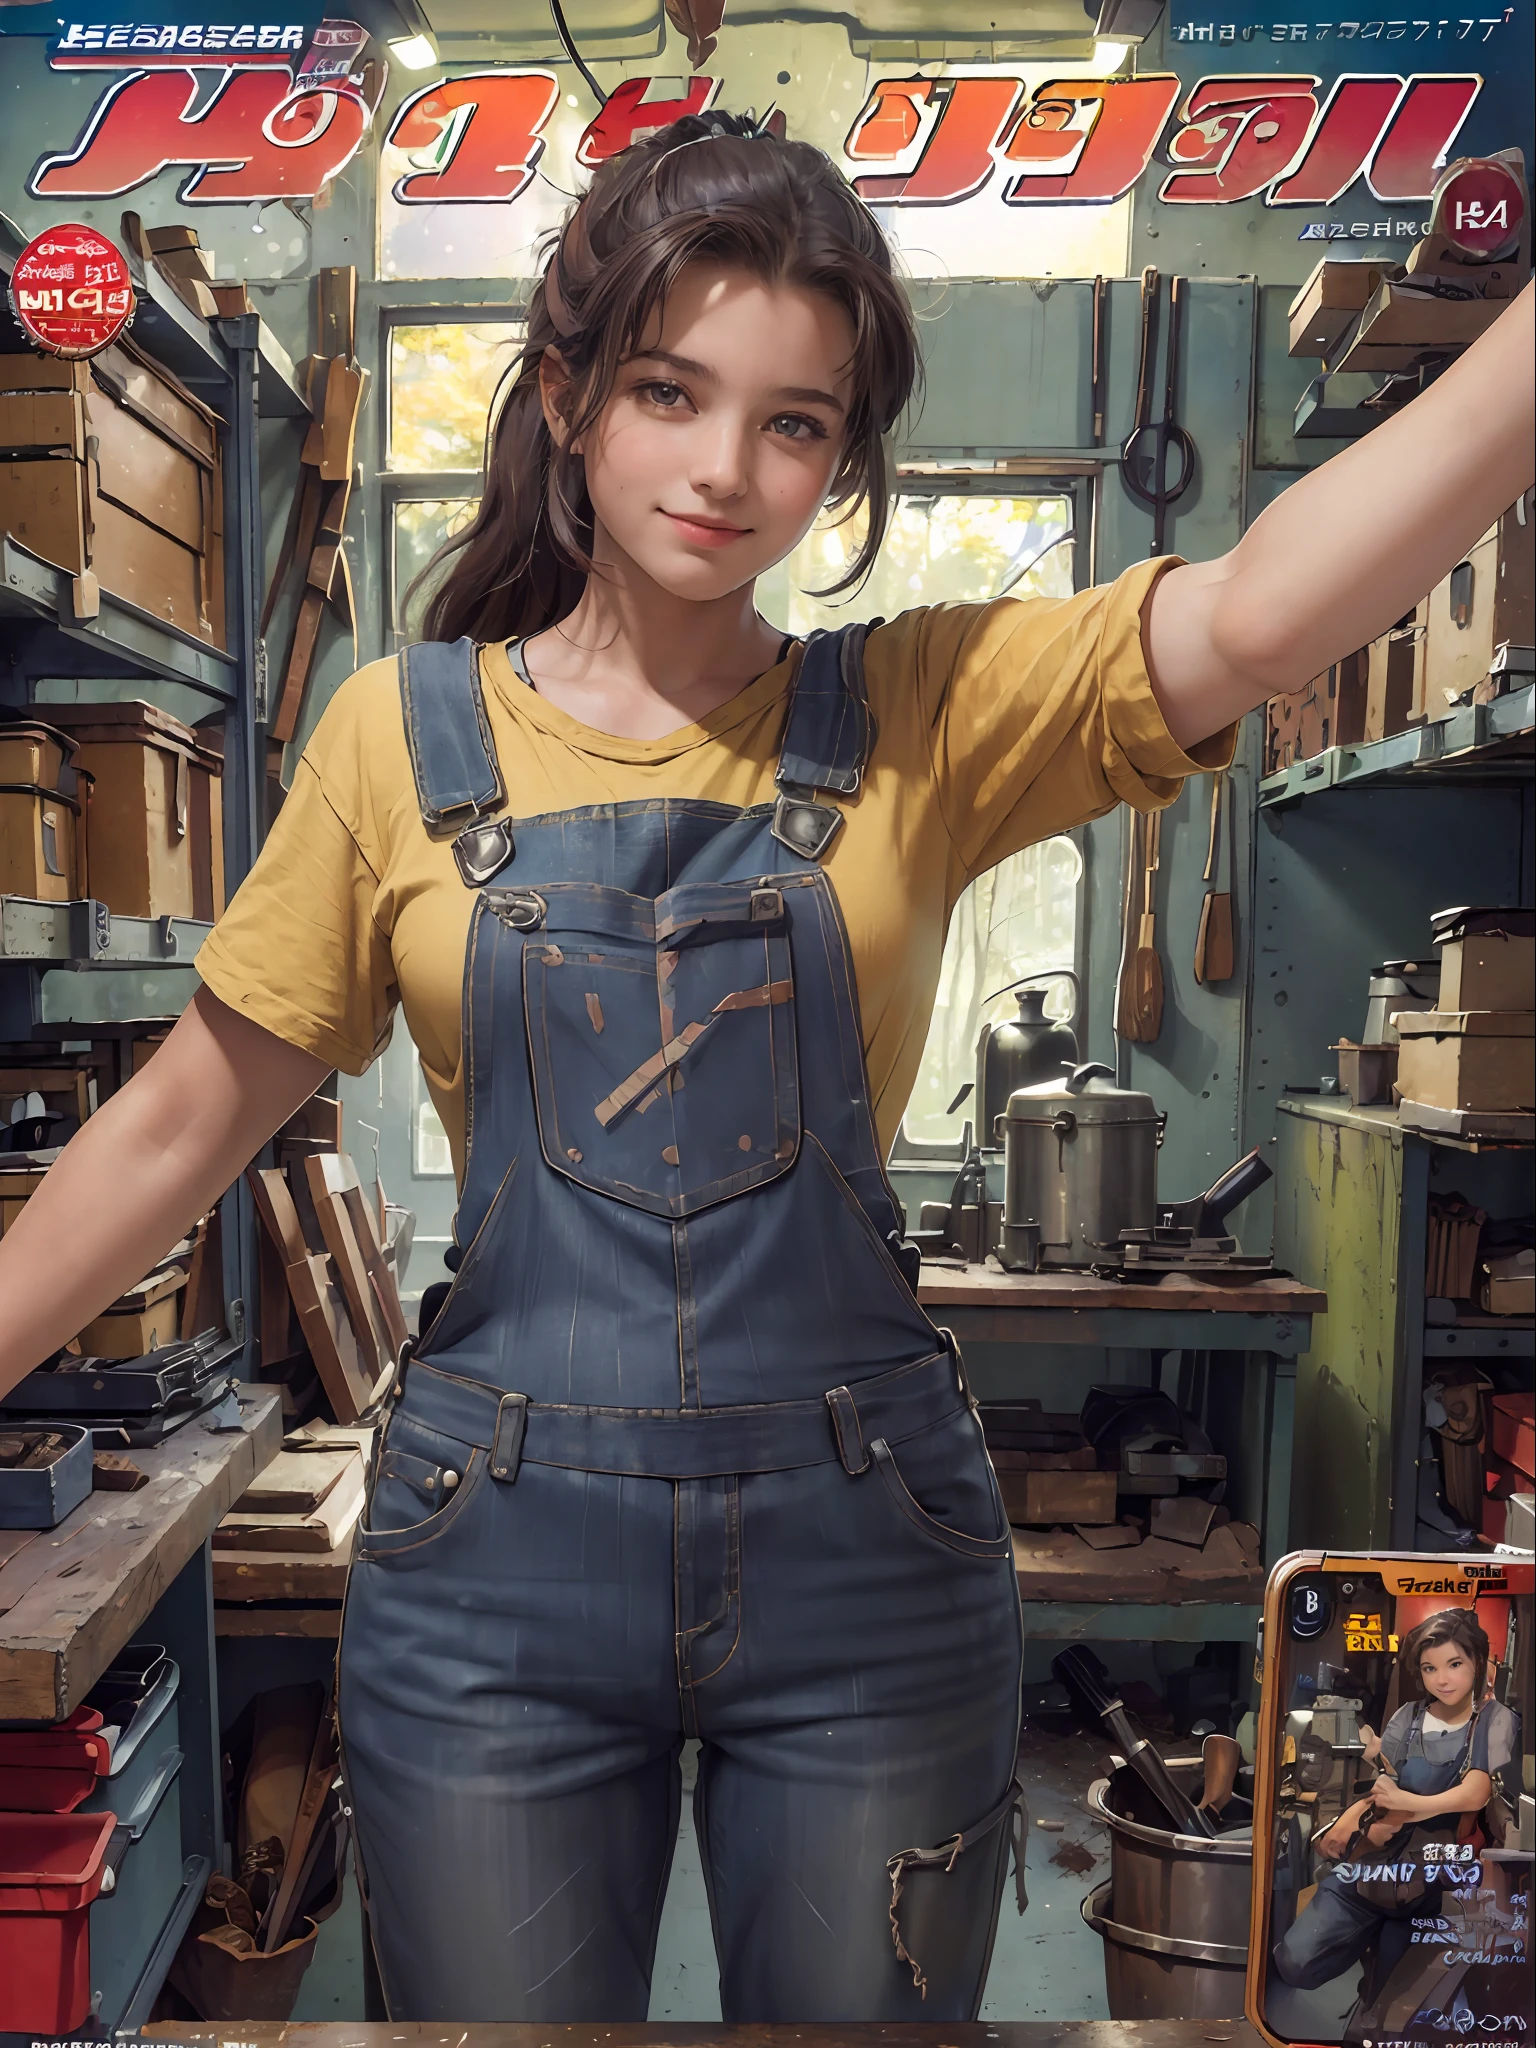 (masterpiece, best quality:1.4), photo, hd, selfie, beautiful metalworker in her workshop, dirty work clothes, dungarees, workbench, shelves, old workshop, watching viewer, grin, analog film, magazine cover photo,